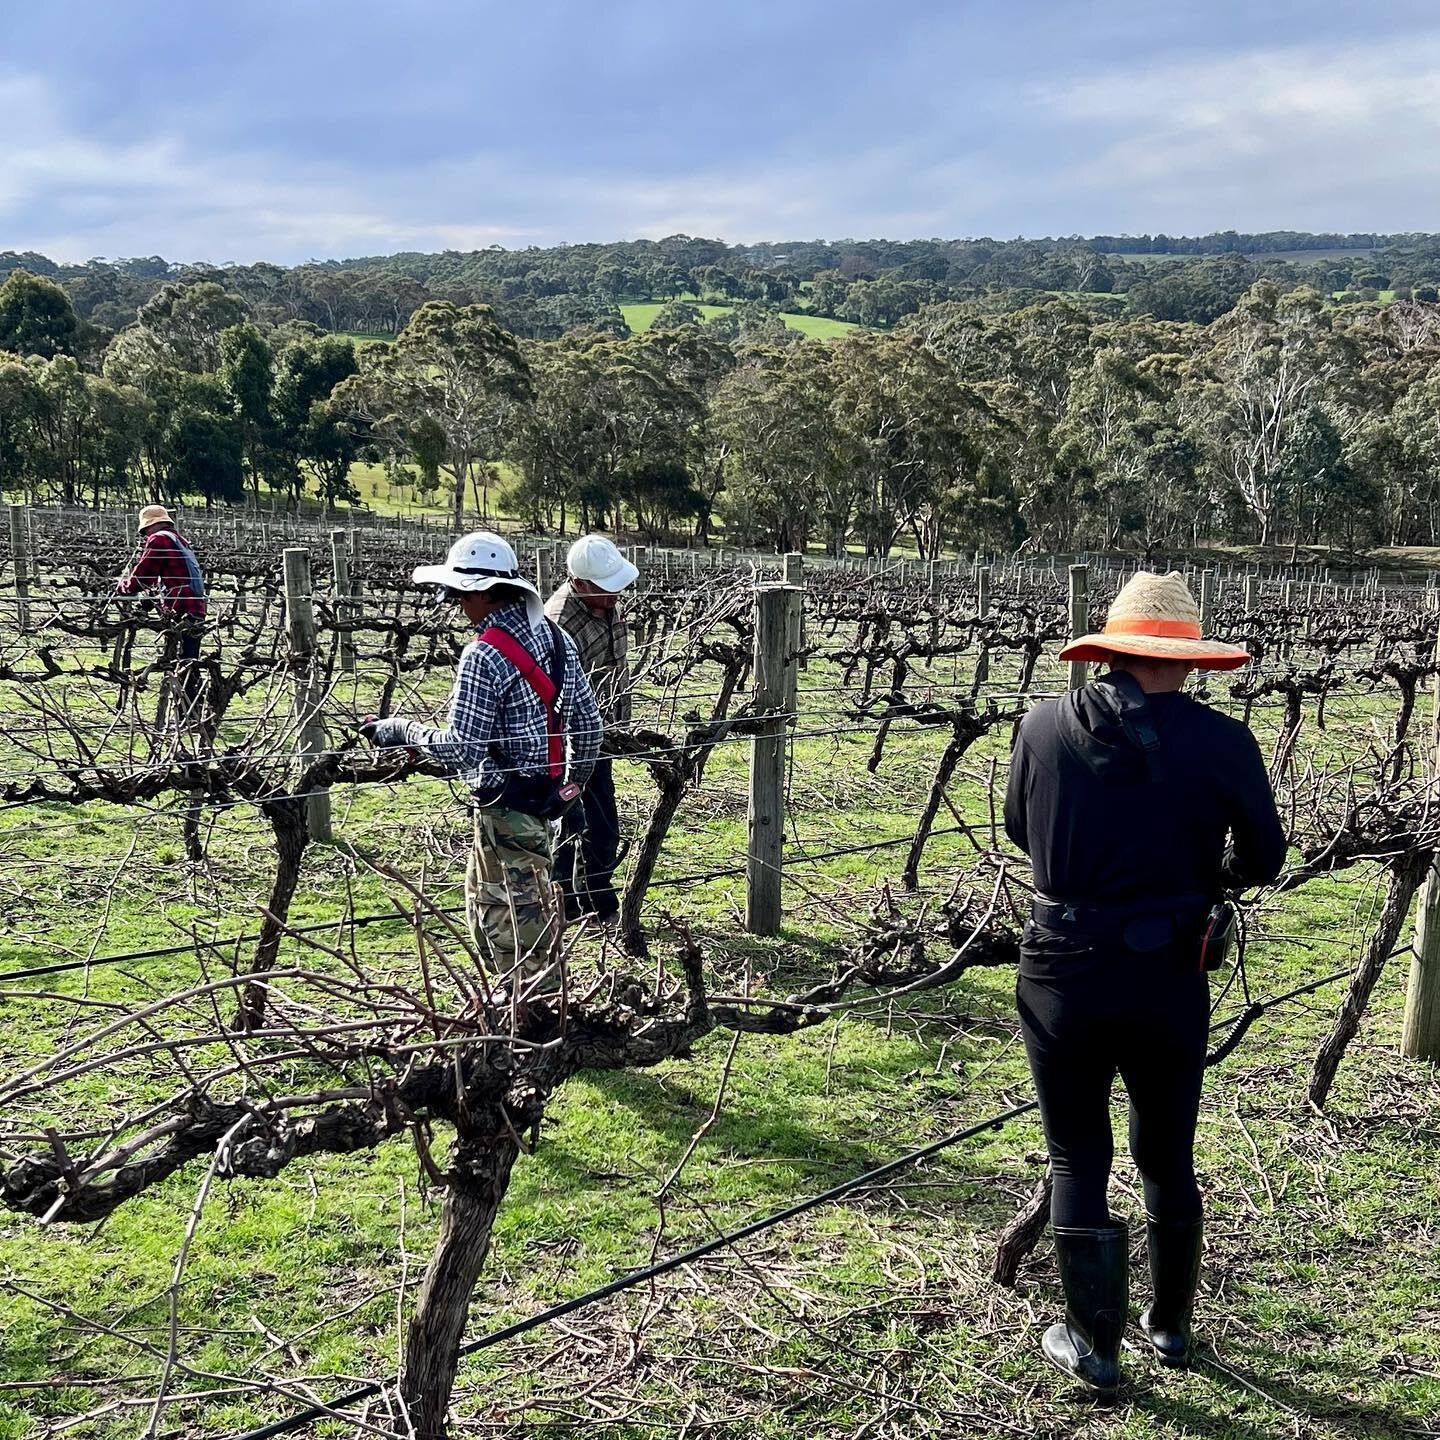 The winter lull is coming to an end&hellip; 🍁 the big barrel pruner has gone through the vineyard already and here our crew is doing the final tips and tops of the vines. There are many ways to prune and the exact methodology is decided each year be